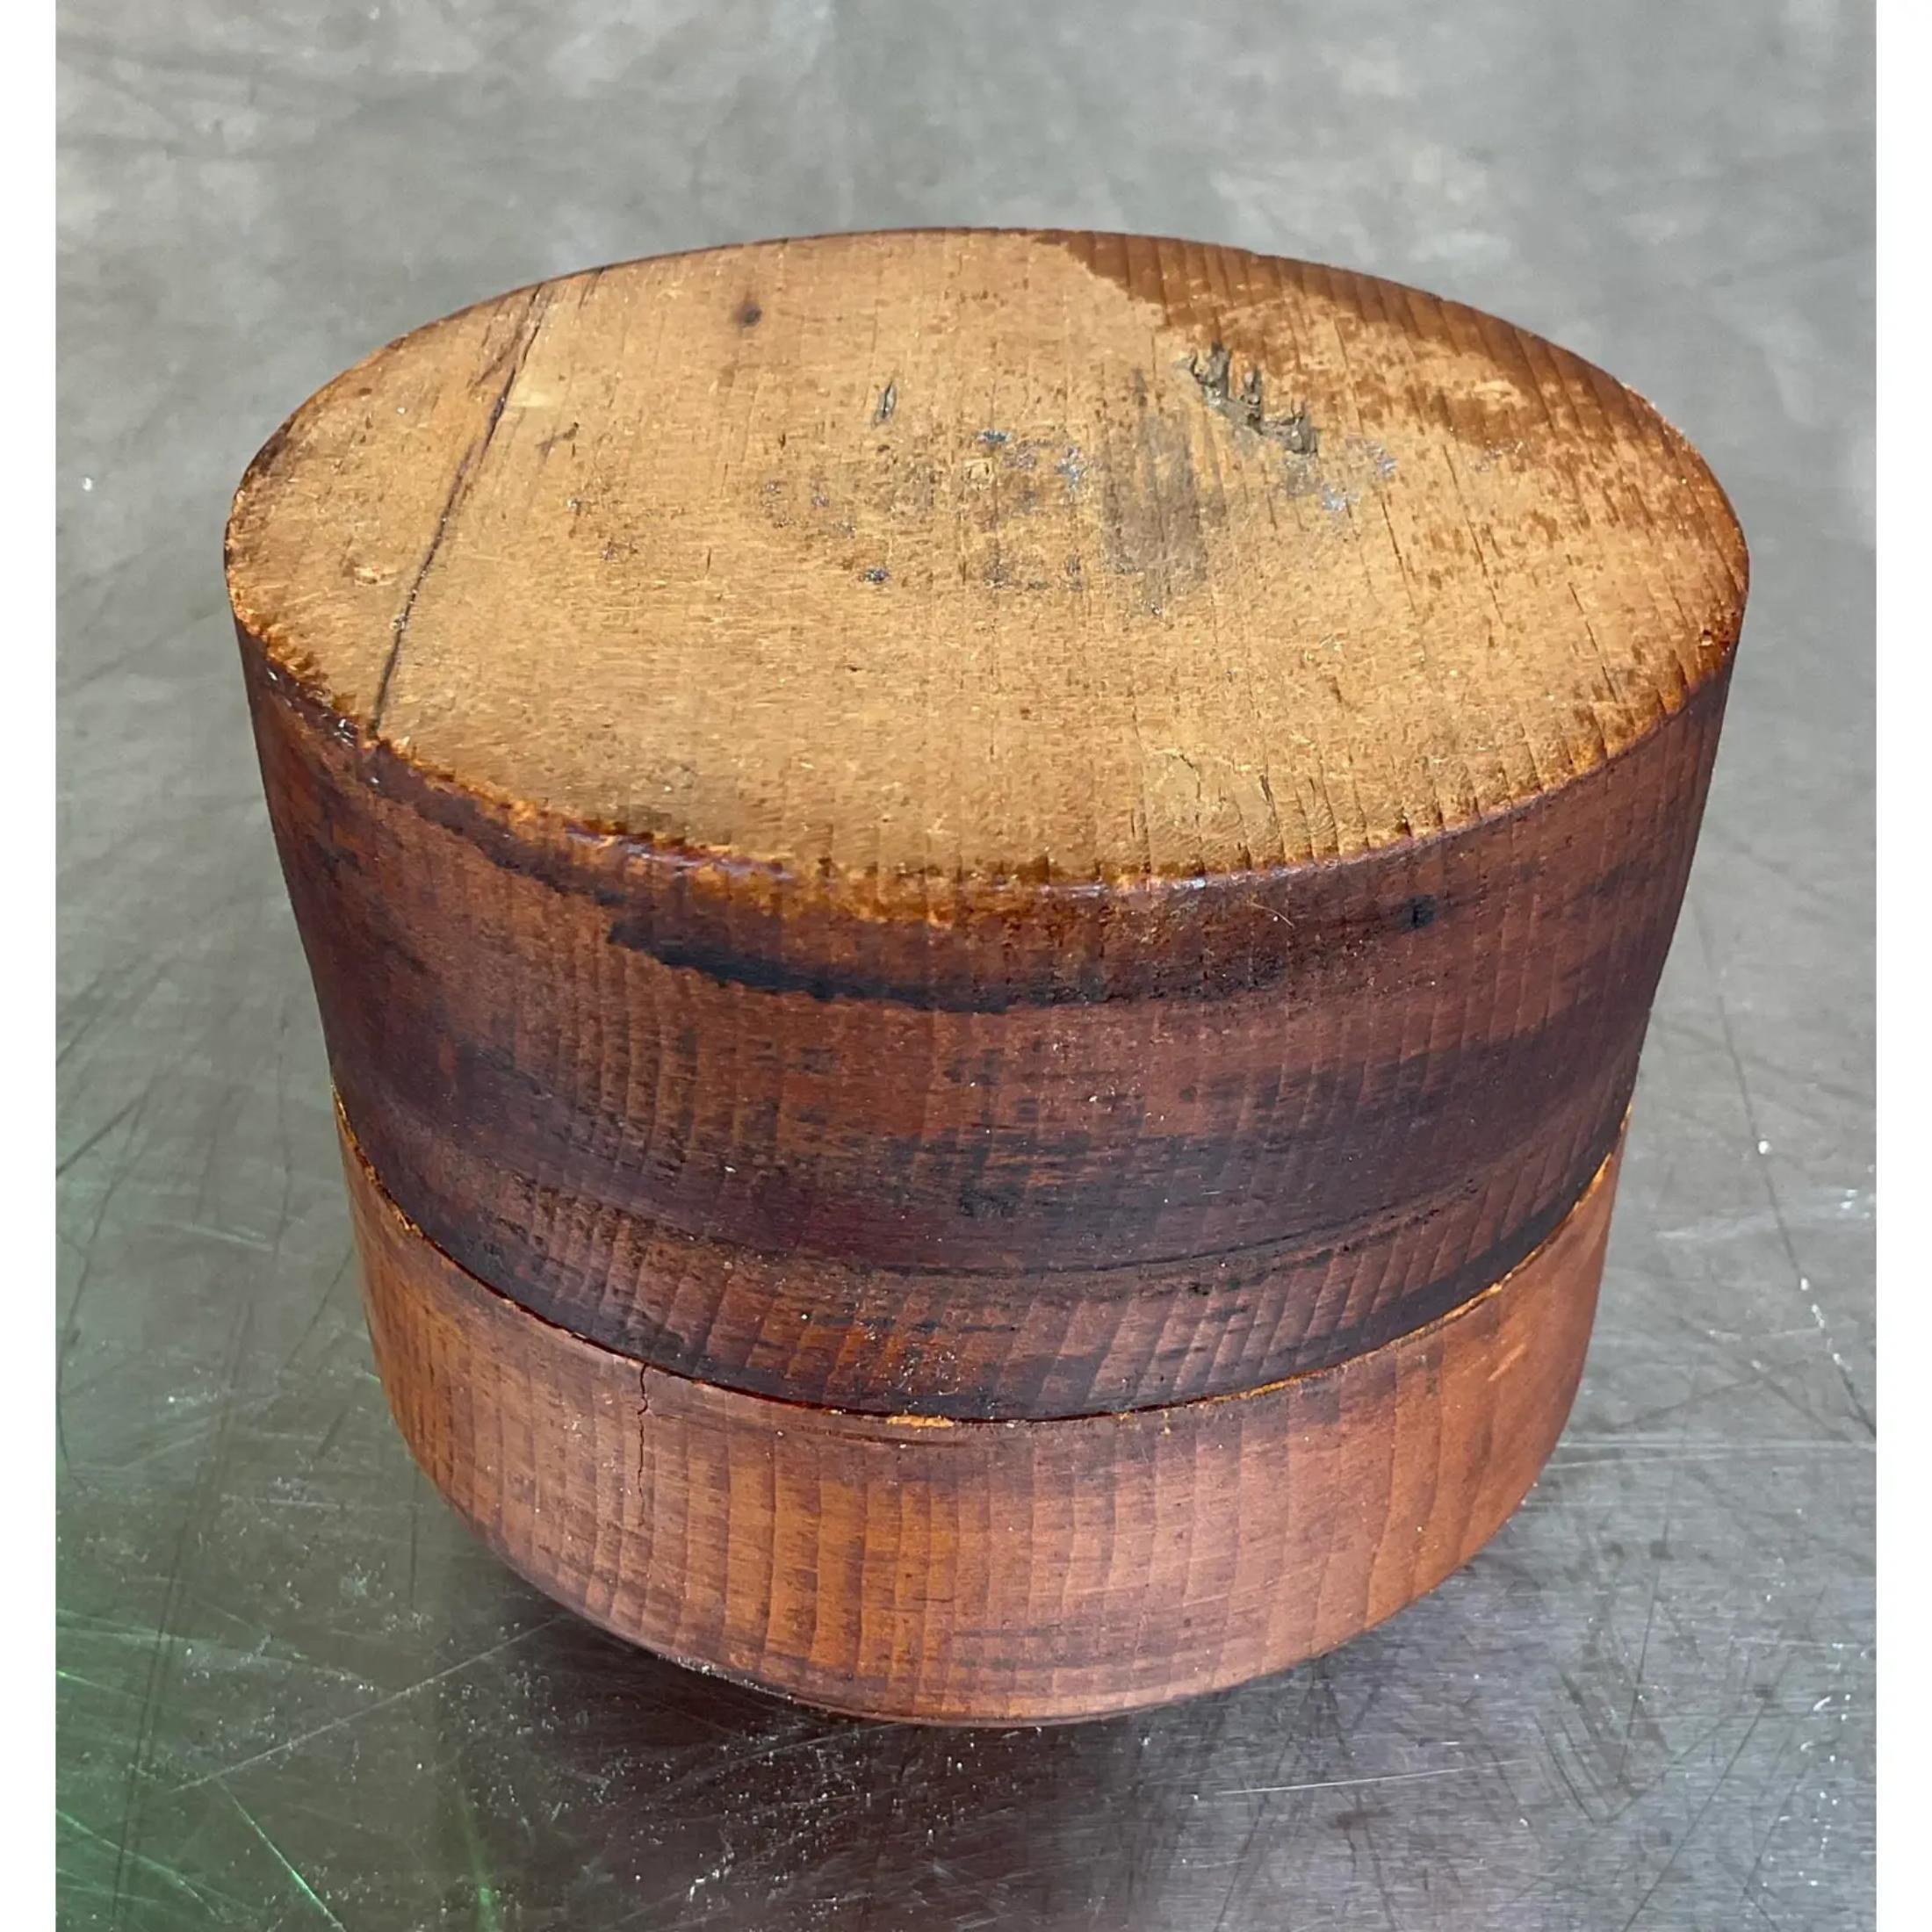 Fantastic vintage Boho Wood box. A chic round shape with a hand finished surface. Rustic in feel with beautiful wood grain detail. Acquired from a NY estate.